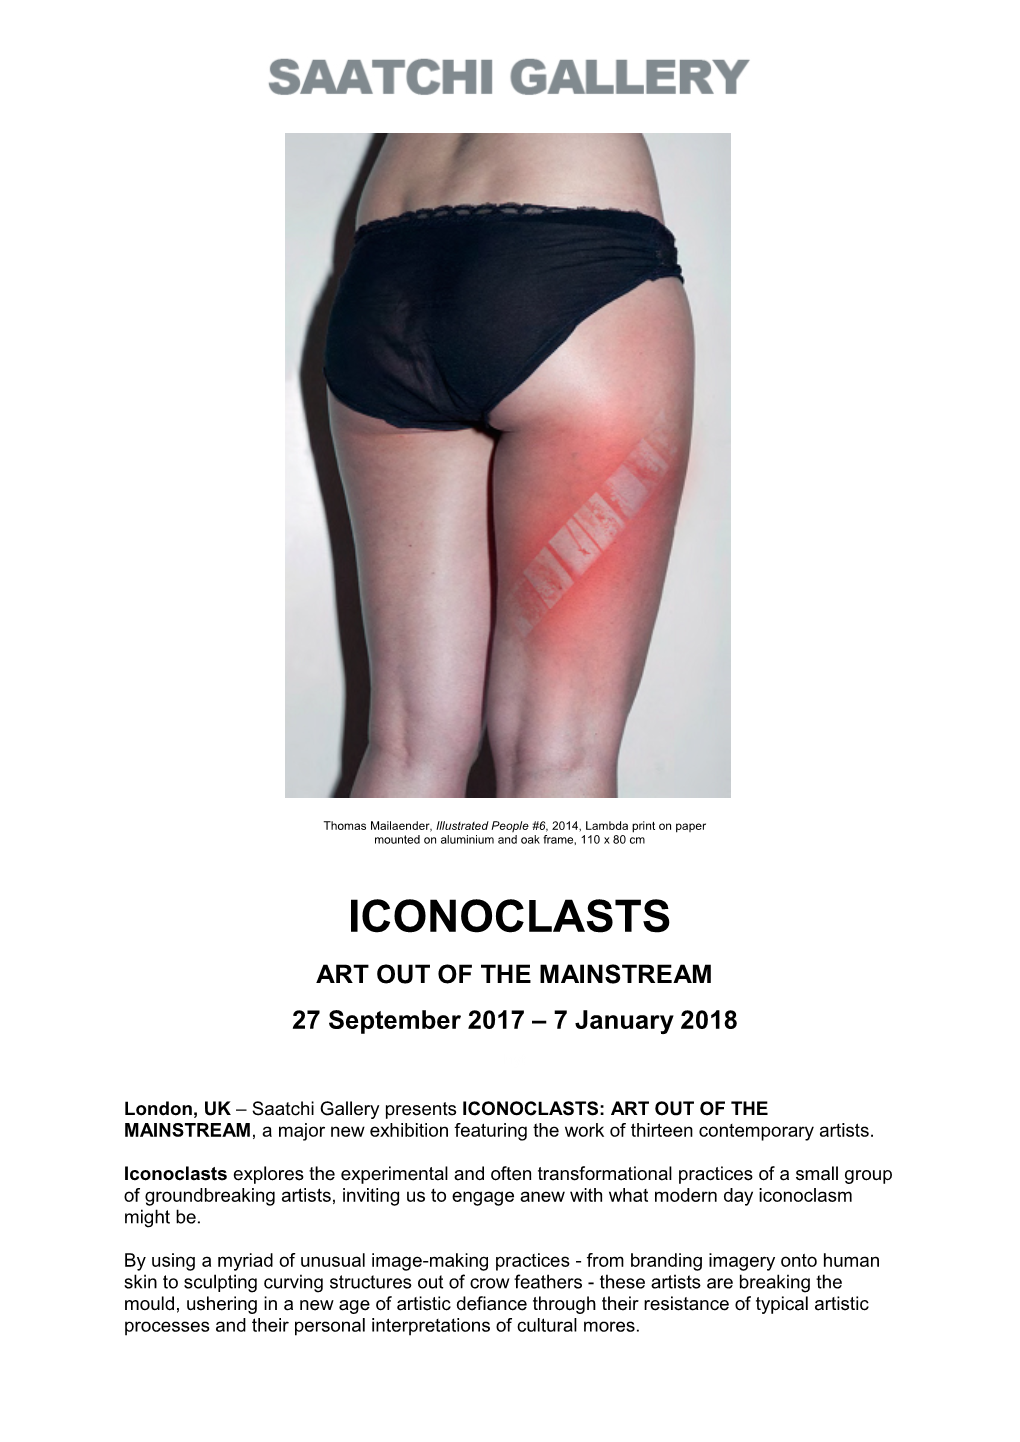 ICONOCLASTS ART out of the MAINSTREAM 27 September 2017 – 7 January 2018